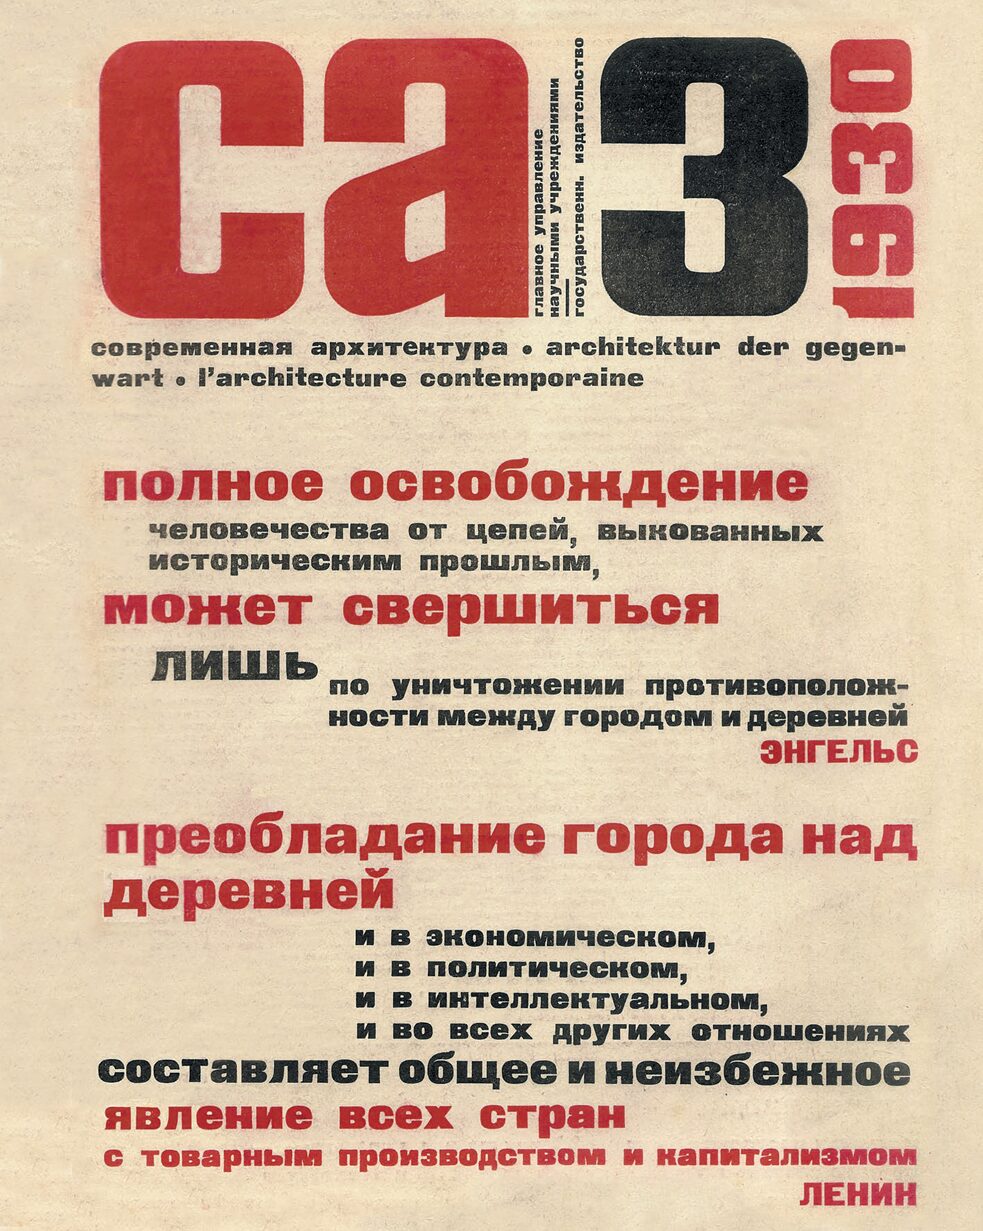 The cover of the Modern Architecture journal, issue 3, 1930, with a publication of the commune project by Nikolay Kuzmin